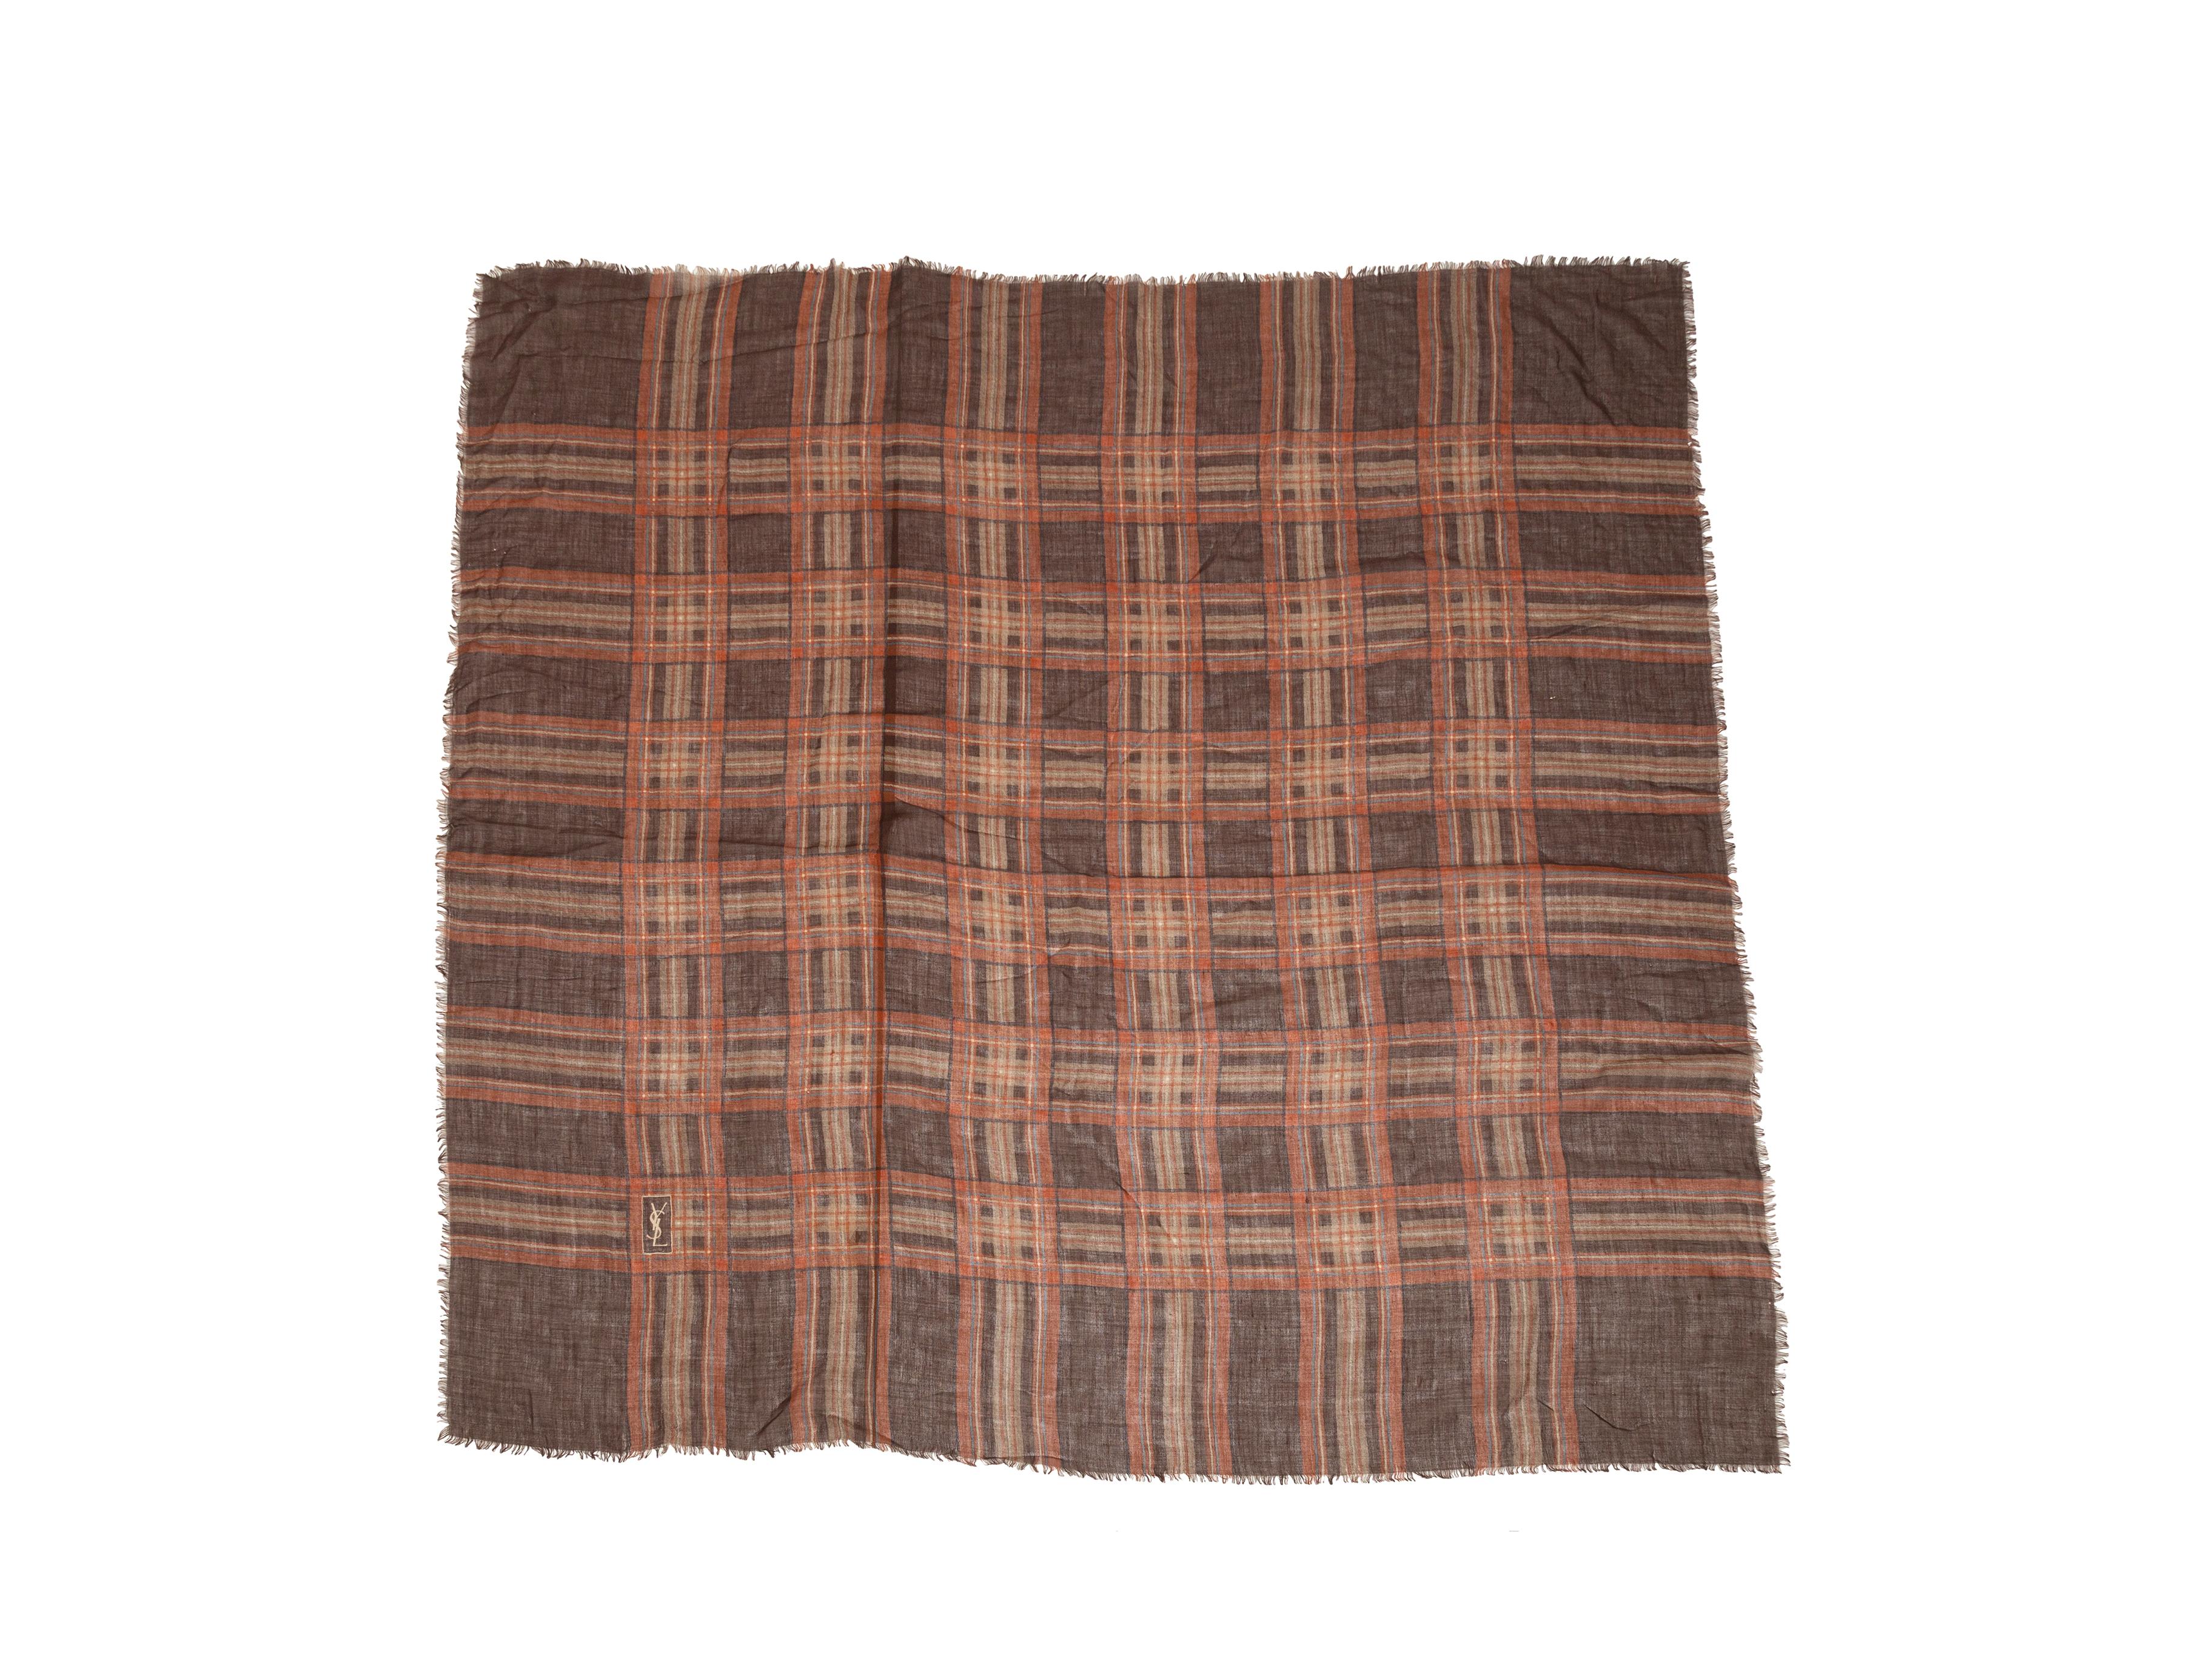 Product details: Vintage brown and multicolor plaid print scarf by Yves Saint Laurent. 53